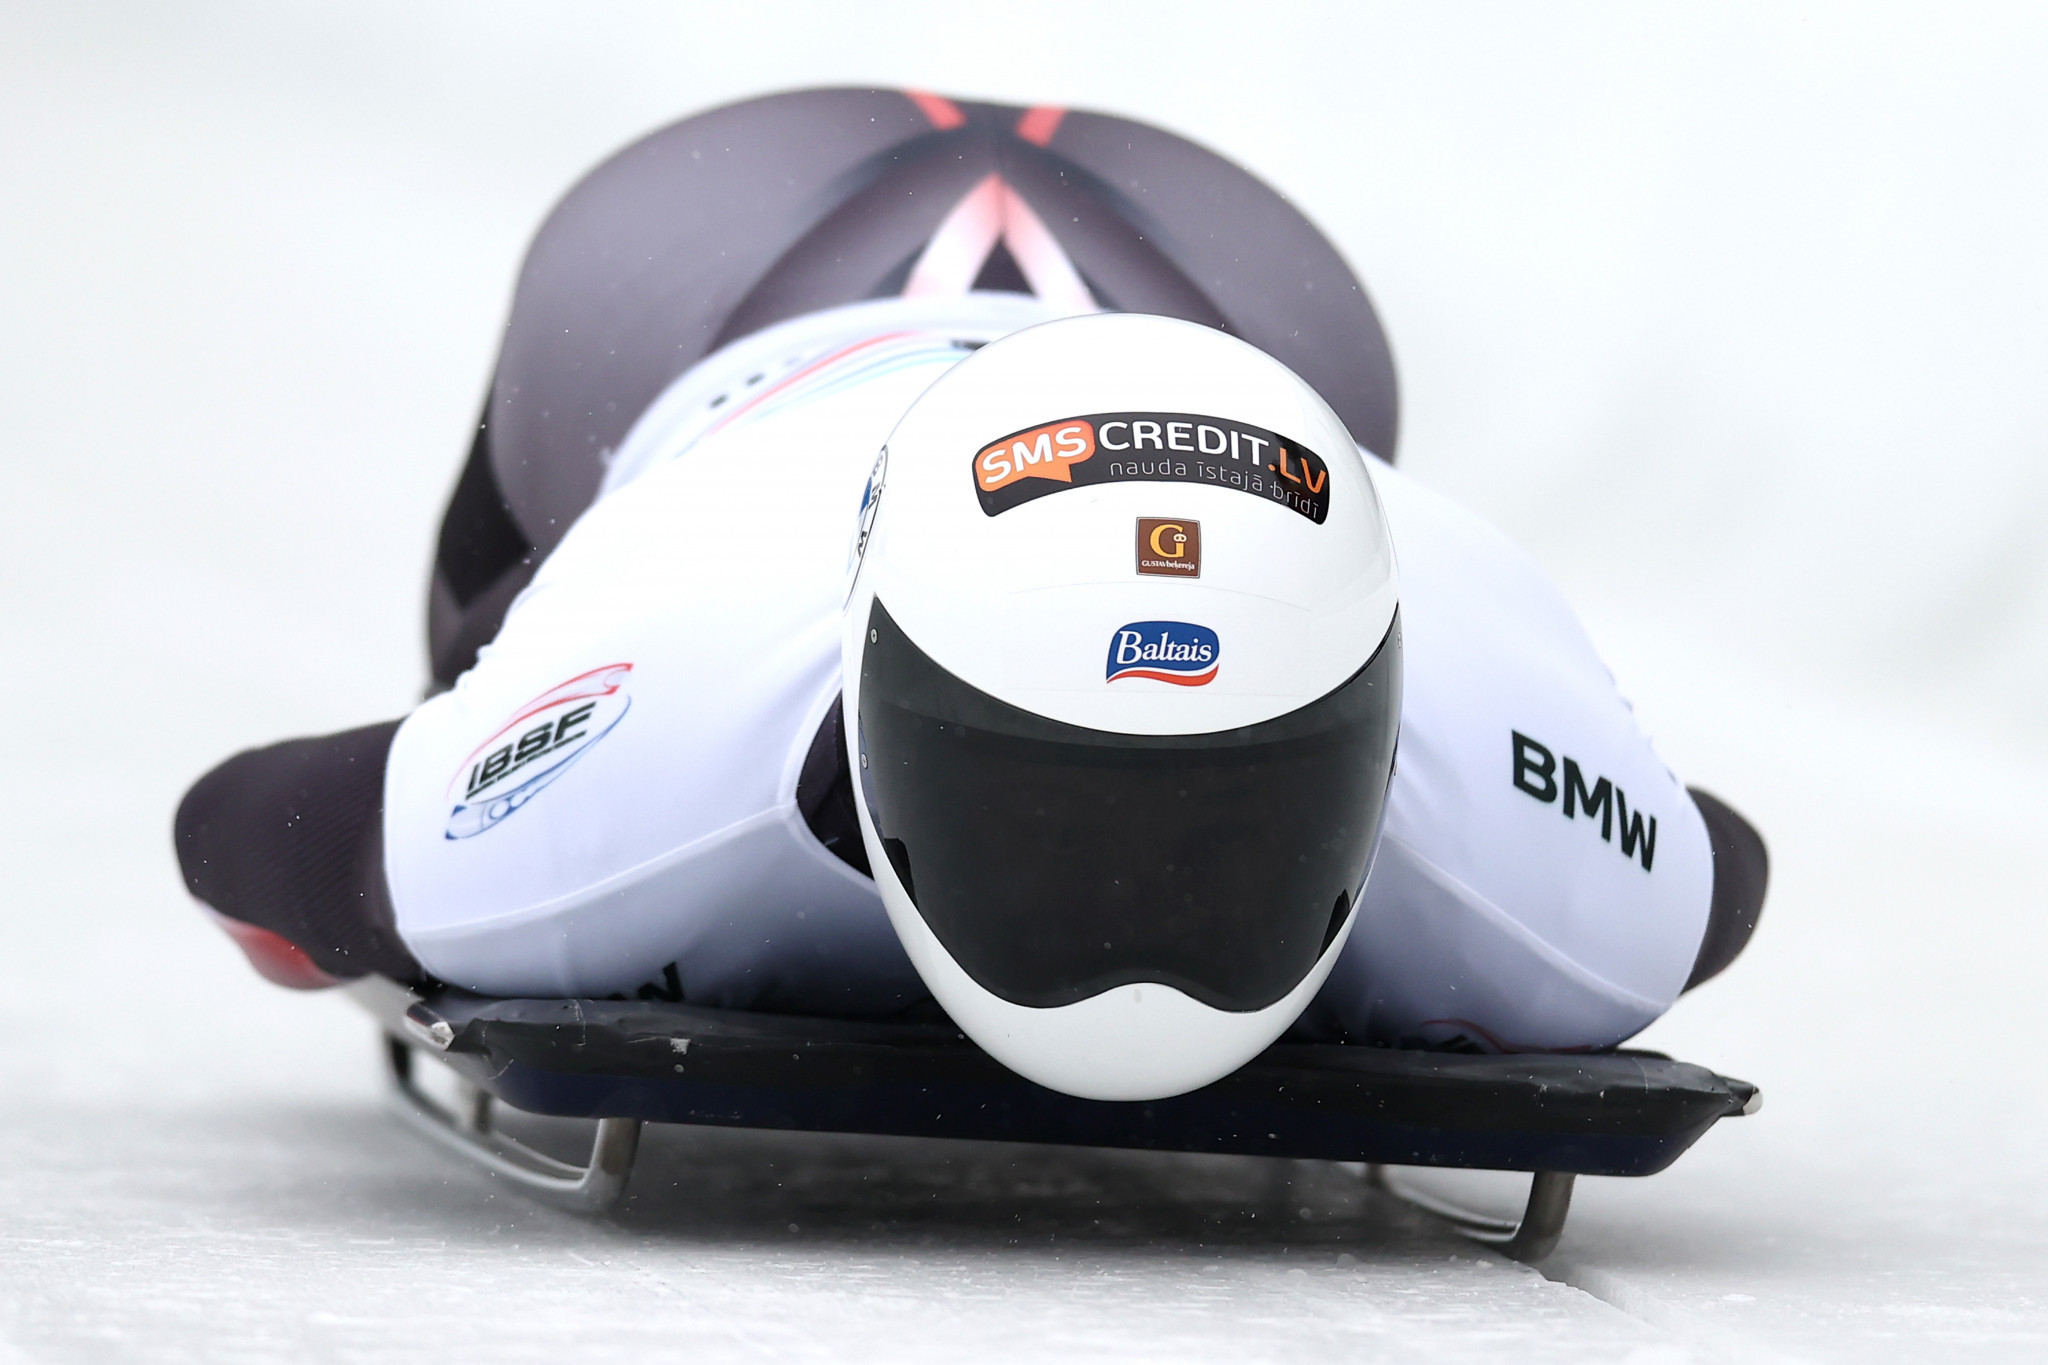 Martins Dukurs won the men's skeleton in Altenberg today ©Getty Images